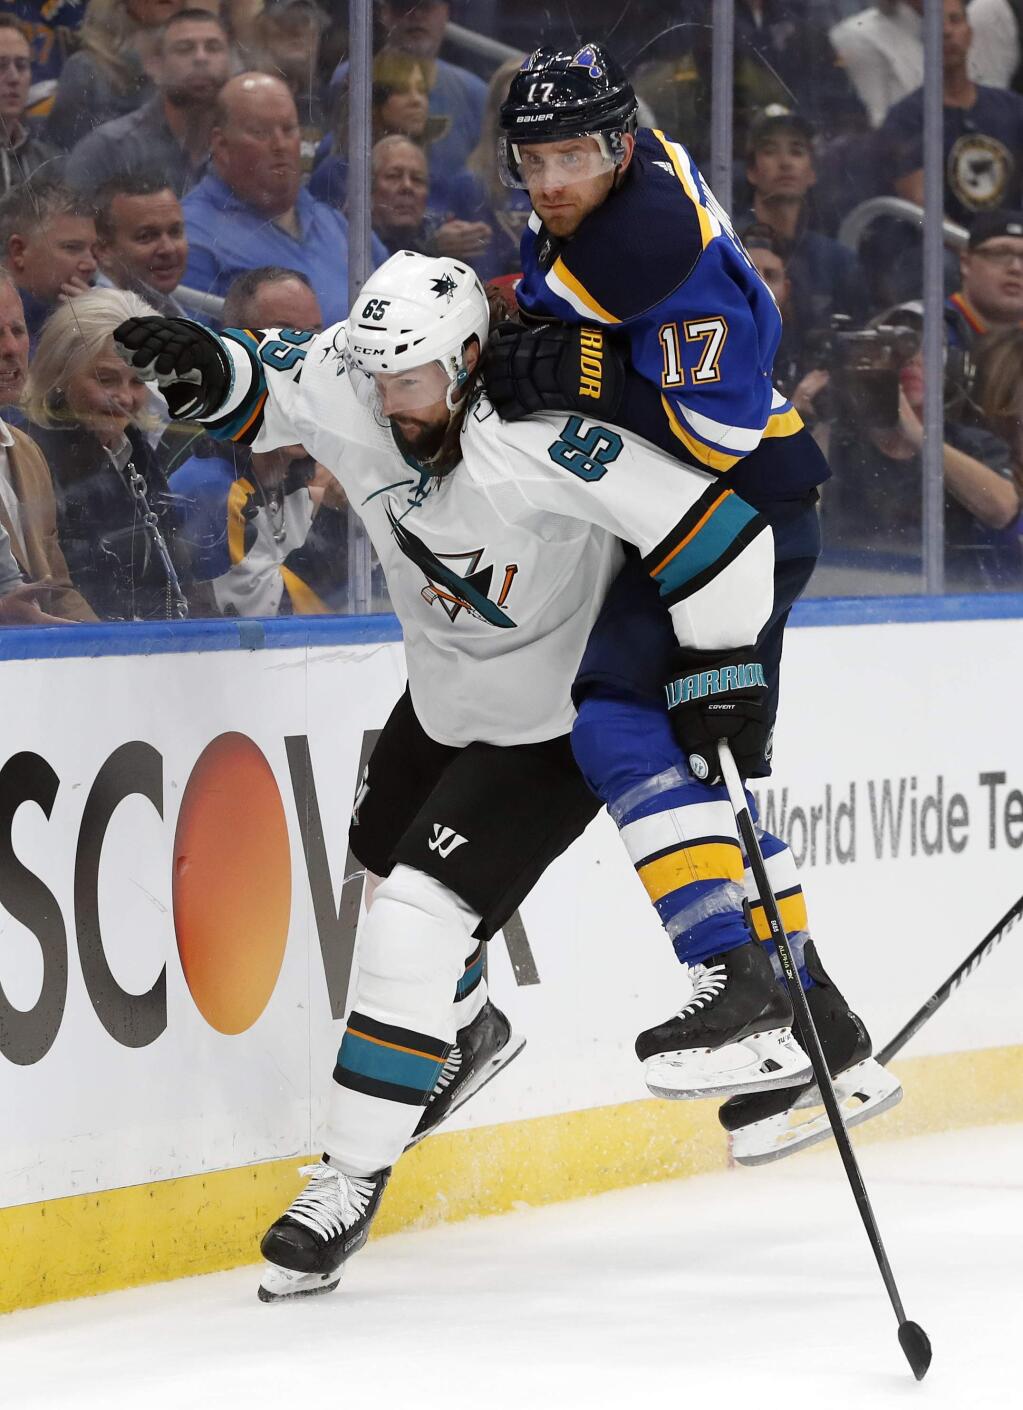 St. Louis Blues left wing Jaden Schwartz (17) lands on the back of San Jose Sharks defenseman Erik Karlsson (65), of Sweden, during the third period in Game 3 of the NHL hockey Stanley Cup Western Conference final series Wednesday, May 15, 2019, in St. Louis. (AP Photo/Jeff Roberson)